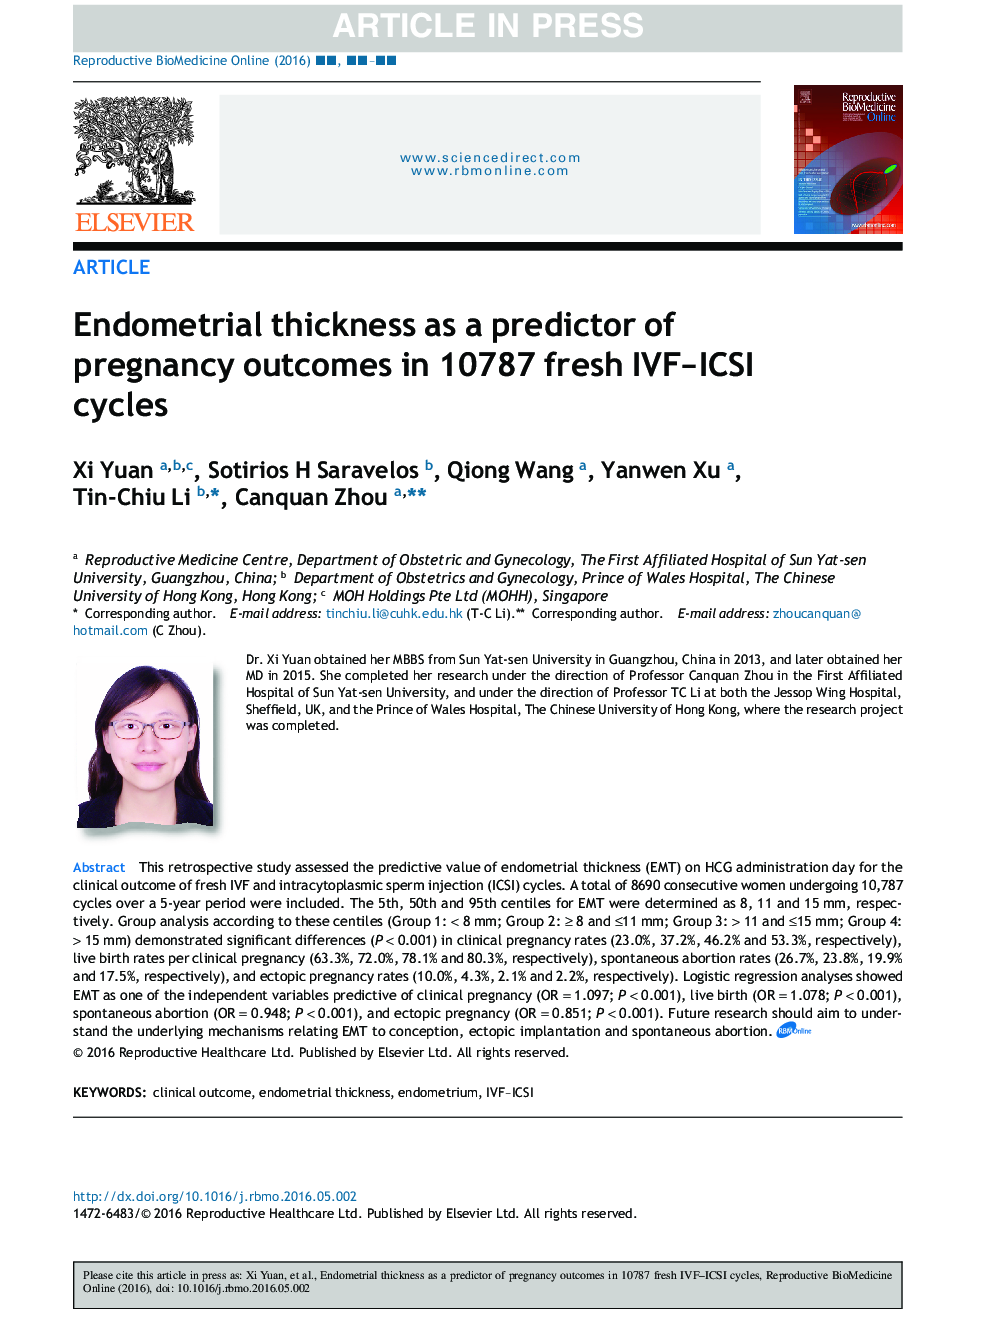 Endometrial thickness as a predictor of pregnancy outcomes in 10787 fresh IVF-ICSI cycles